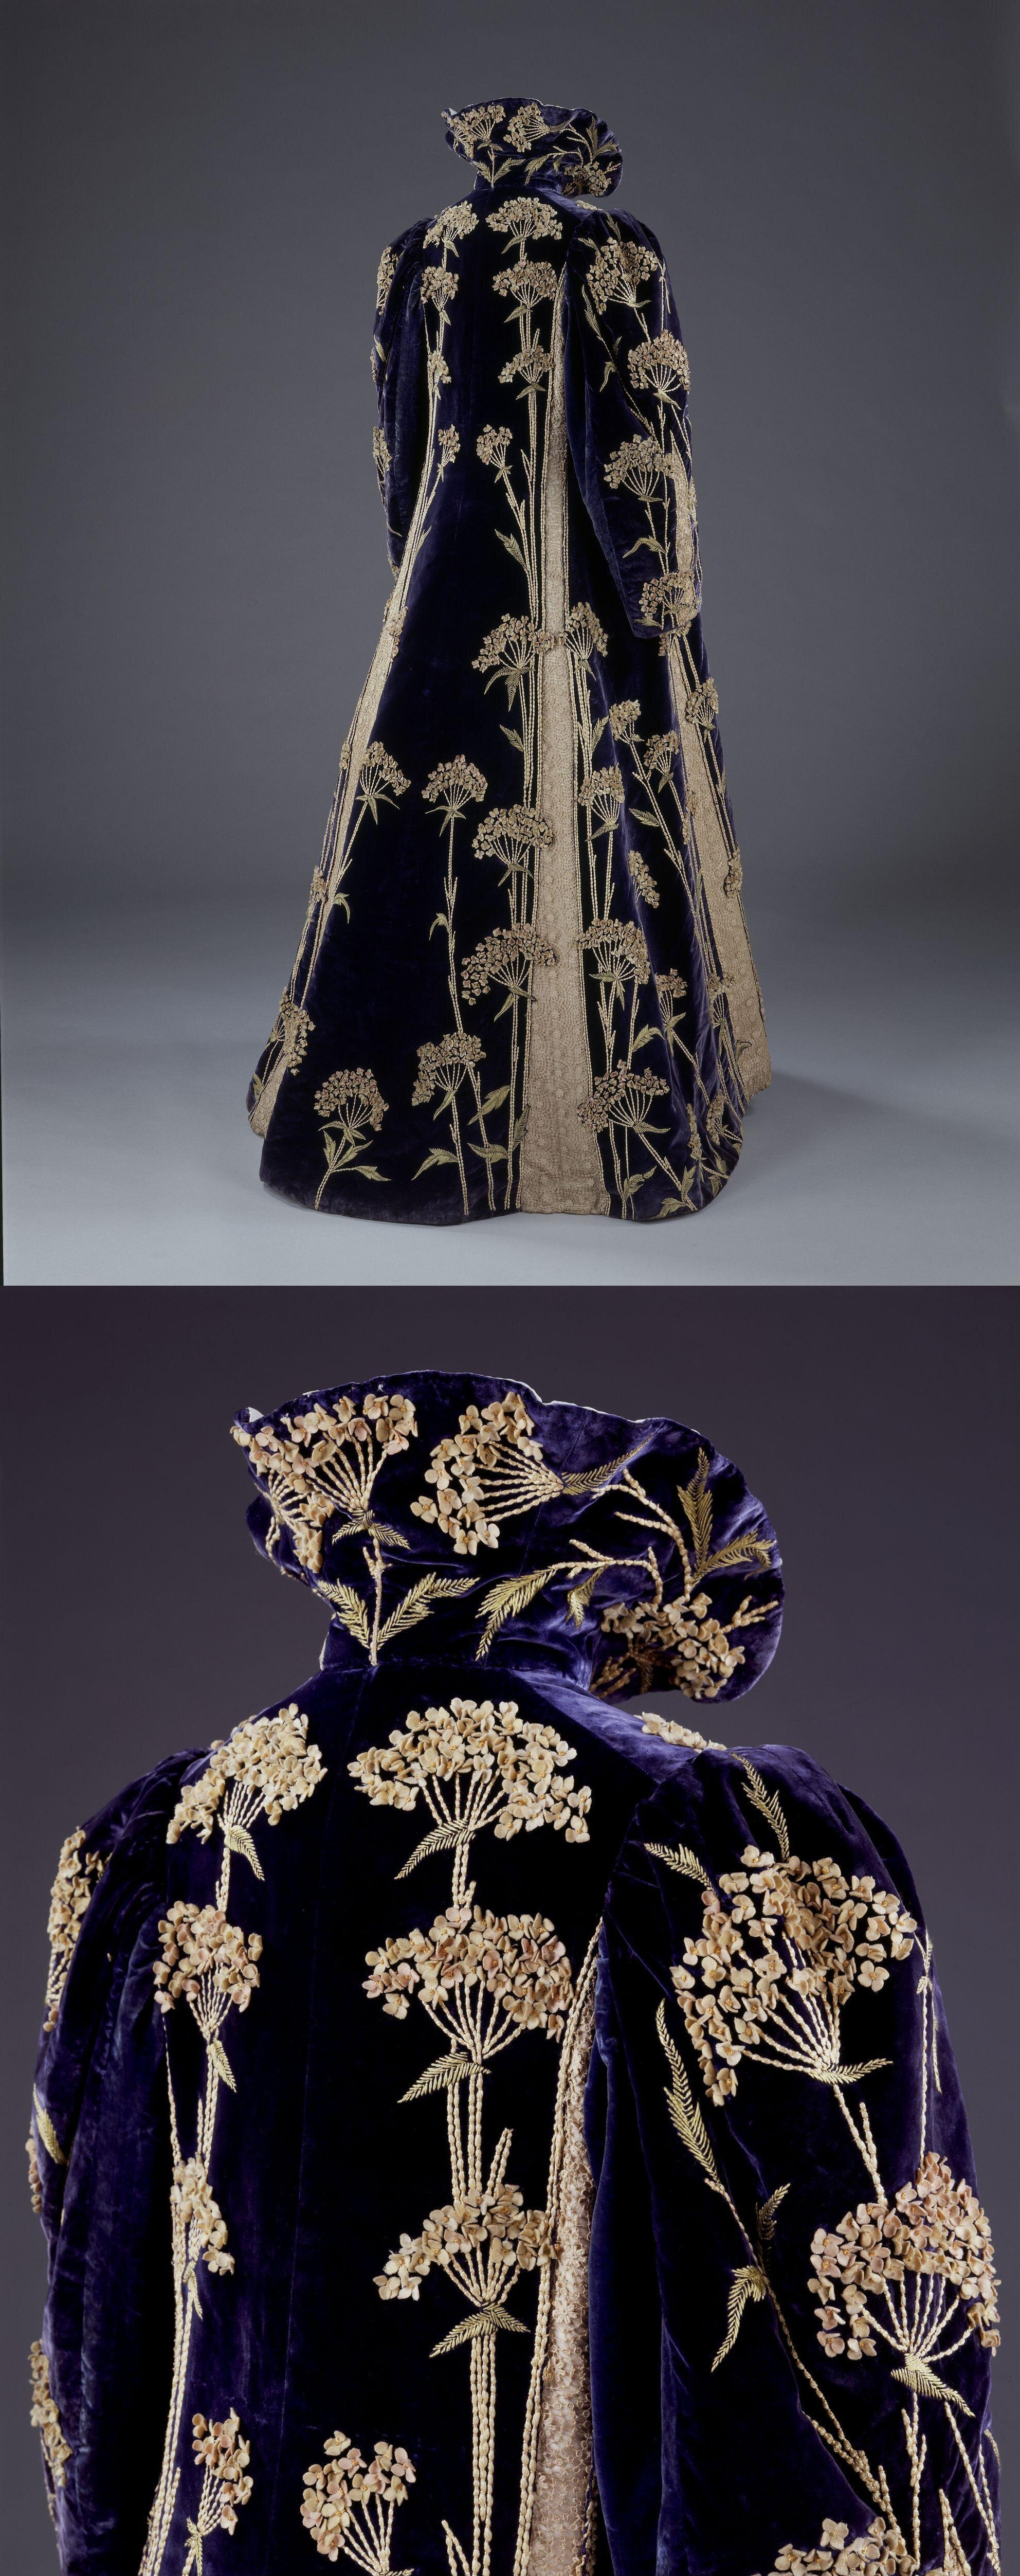 Embroidered velvet coat with silks, satin and machine-made lace, made and retailed by Marshall and Snelgrove, England, 1895-1900. Victoria & Albert Museum.jpg